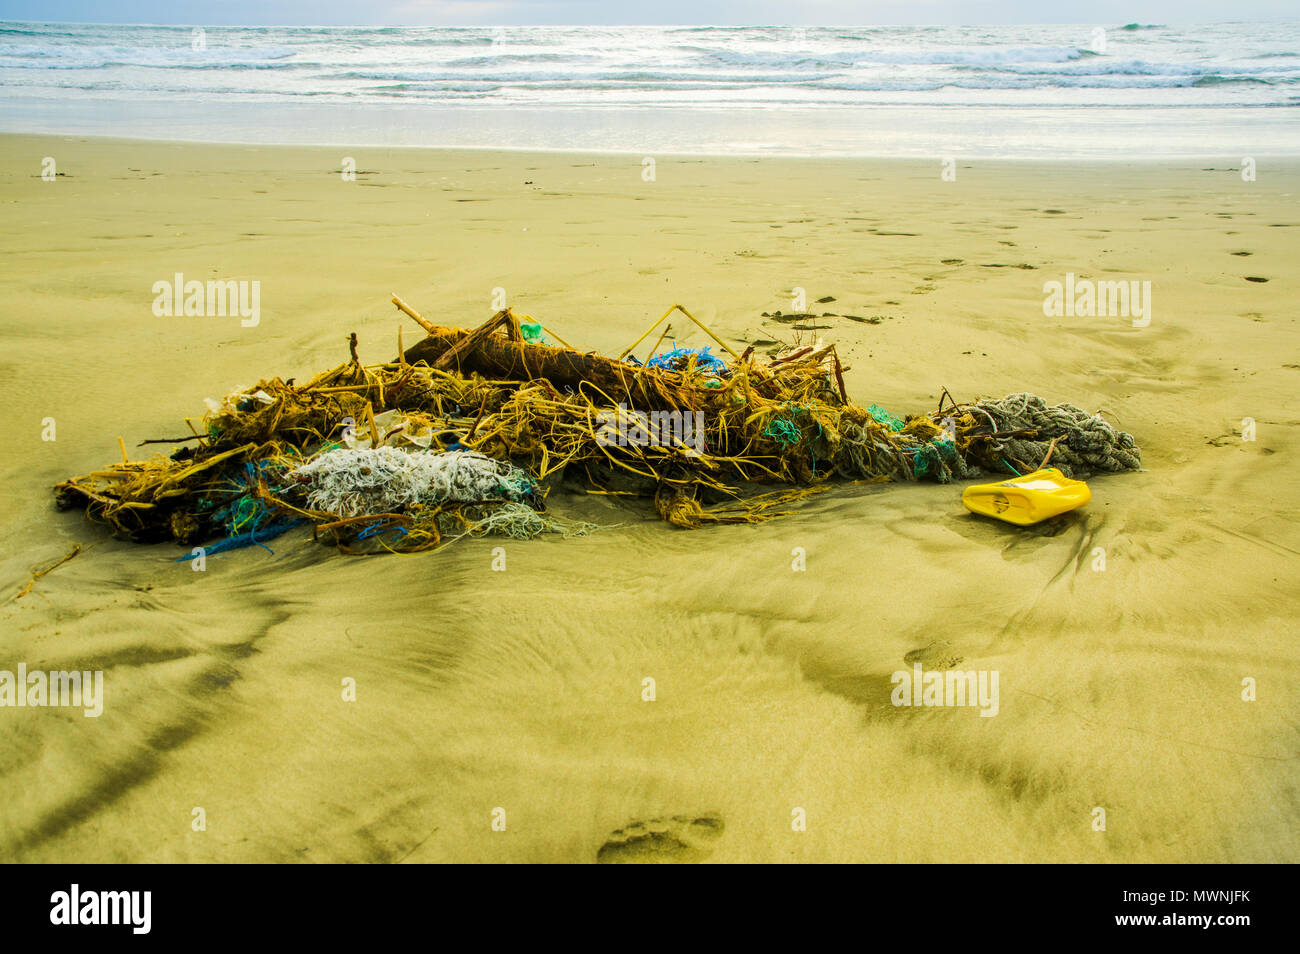 Outdoor view of fishing net and ropes garbage in the beach, every day, waste accumulates on the beach of Atlantic west coast, they arrive from ocean currents effect Stock Photo